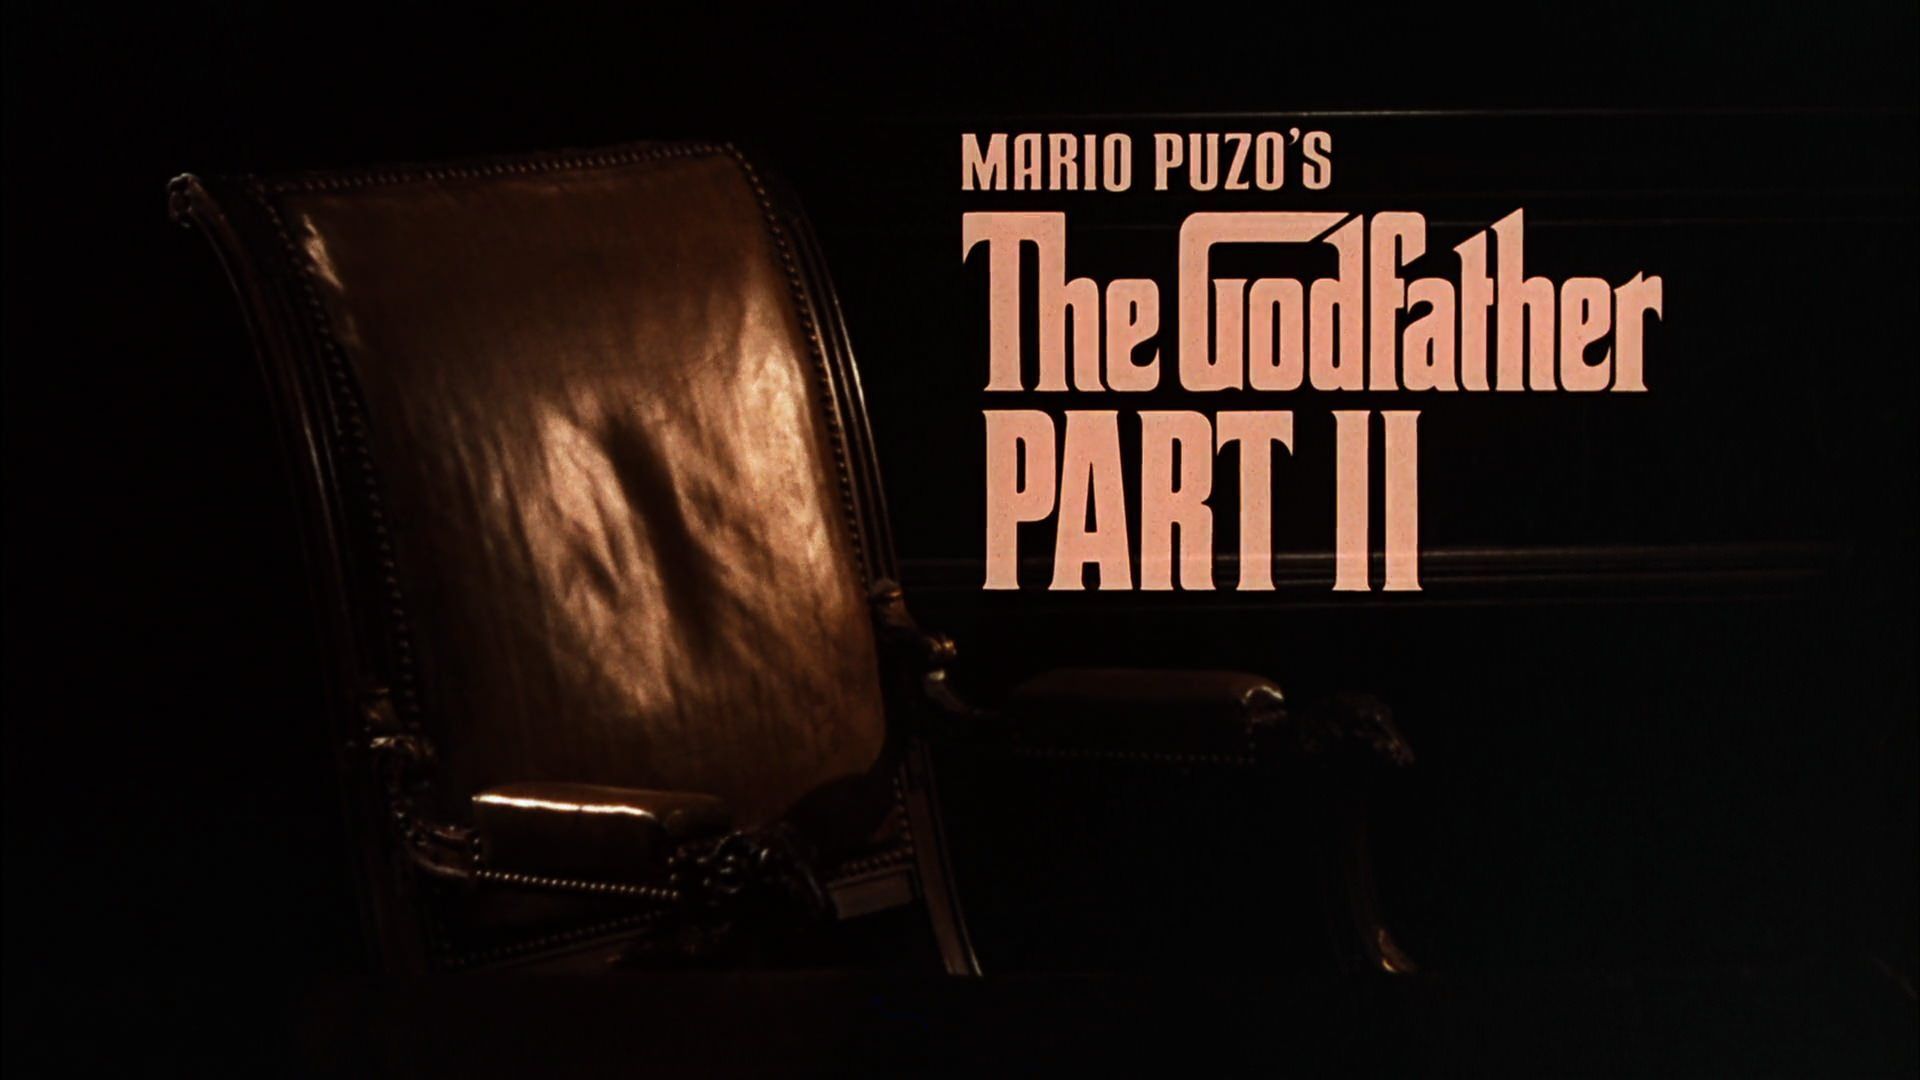 The Godfather 2 Wallpaper Free The Godfather 2 Background